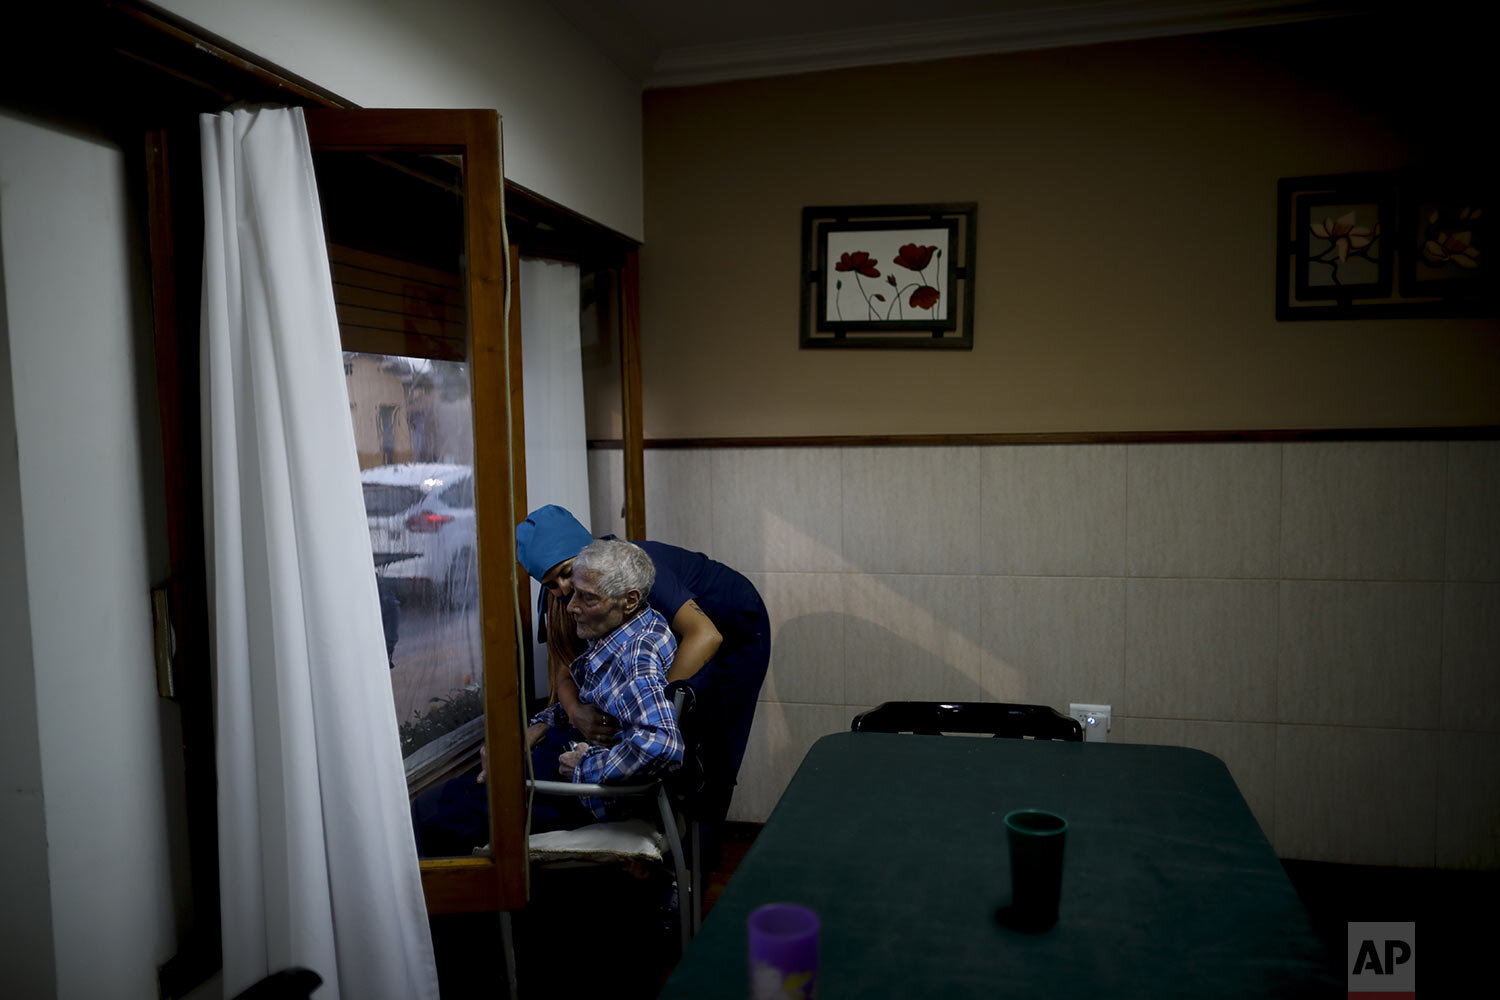  Nurse Rocio Lescano, 86, helps Victor Tripiana in his chair in front of a window where he visits with his family on the other side, at the Reminiscencias residence in Tandil, Argentina, Sunday, April 4, 2021. (AP Photo/Natacha Pisarenko) 